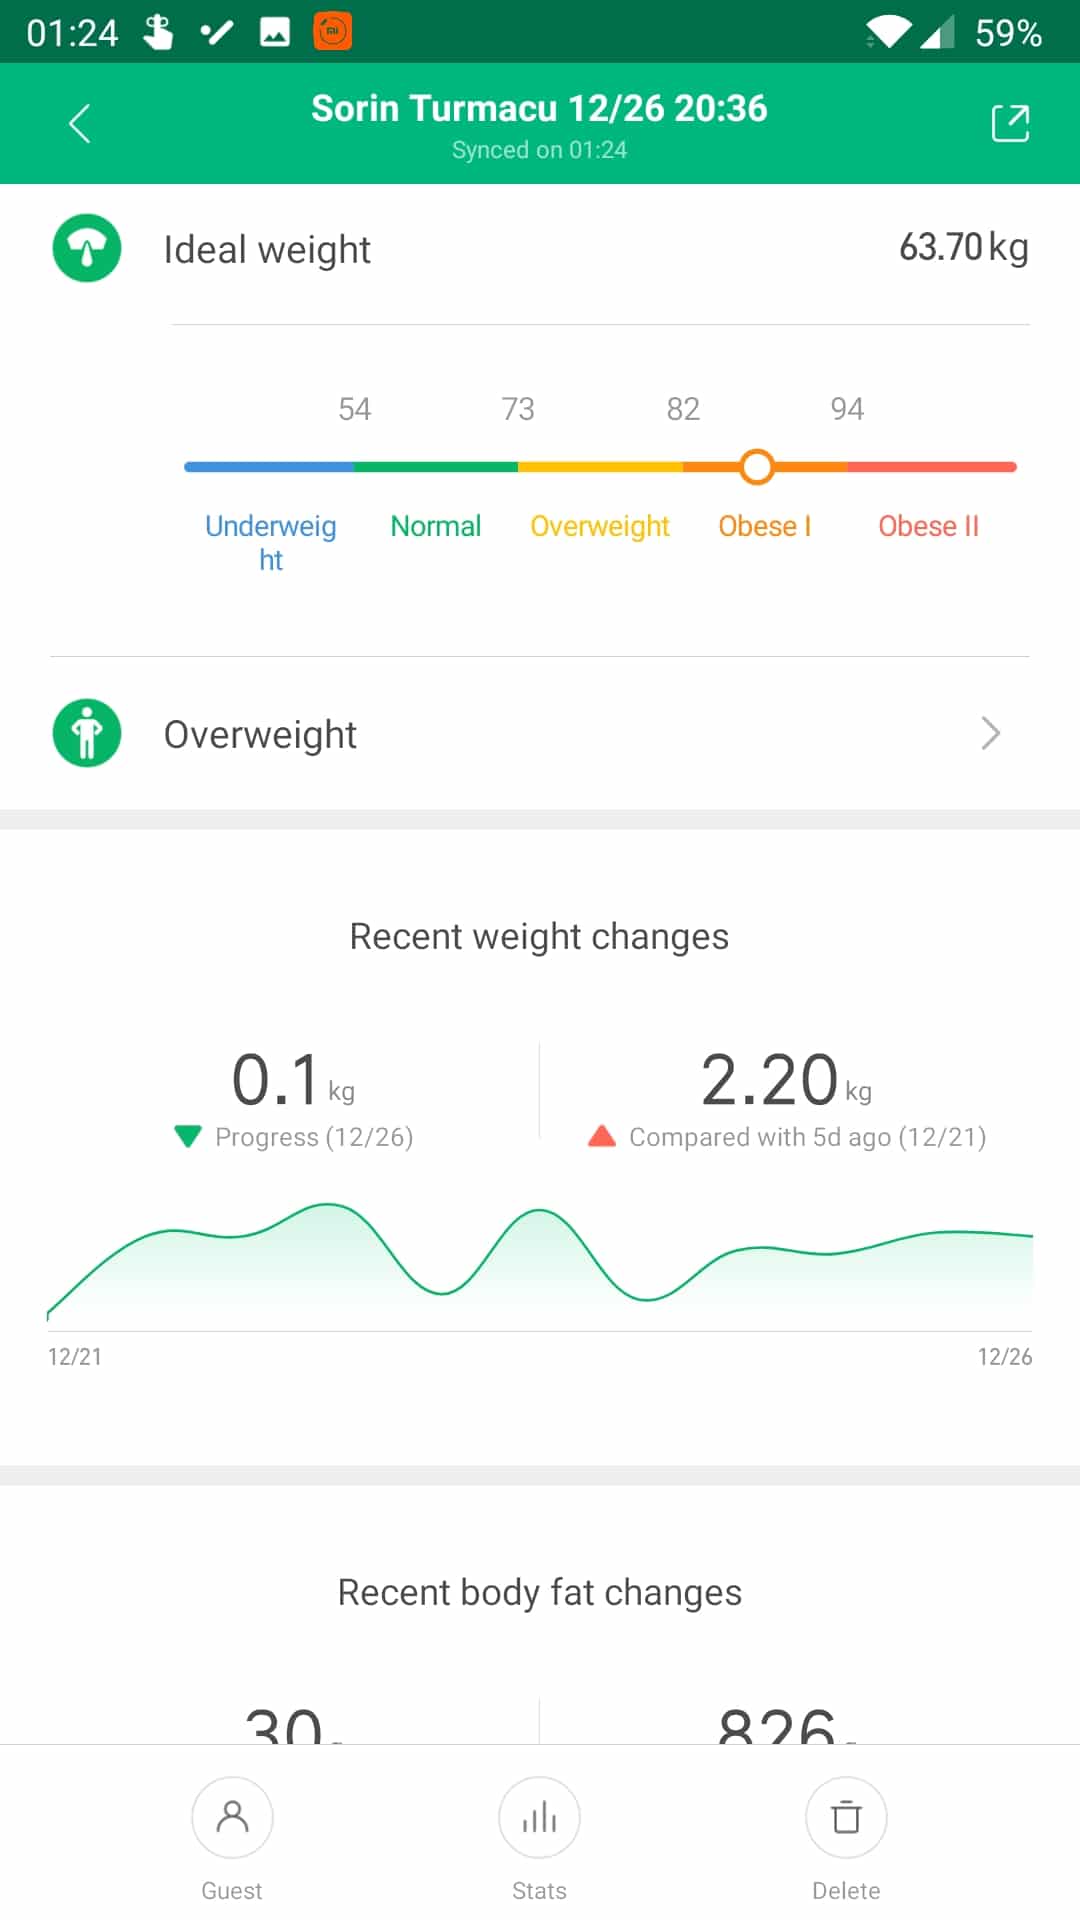 Xiaomi Mi Weight Scale 2 / Body Composition Scale 2 Body Weight